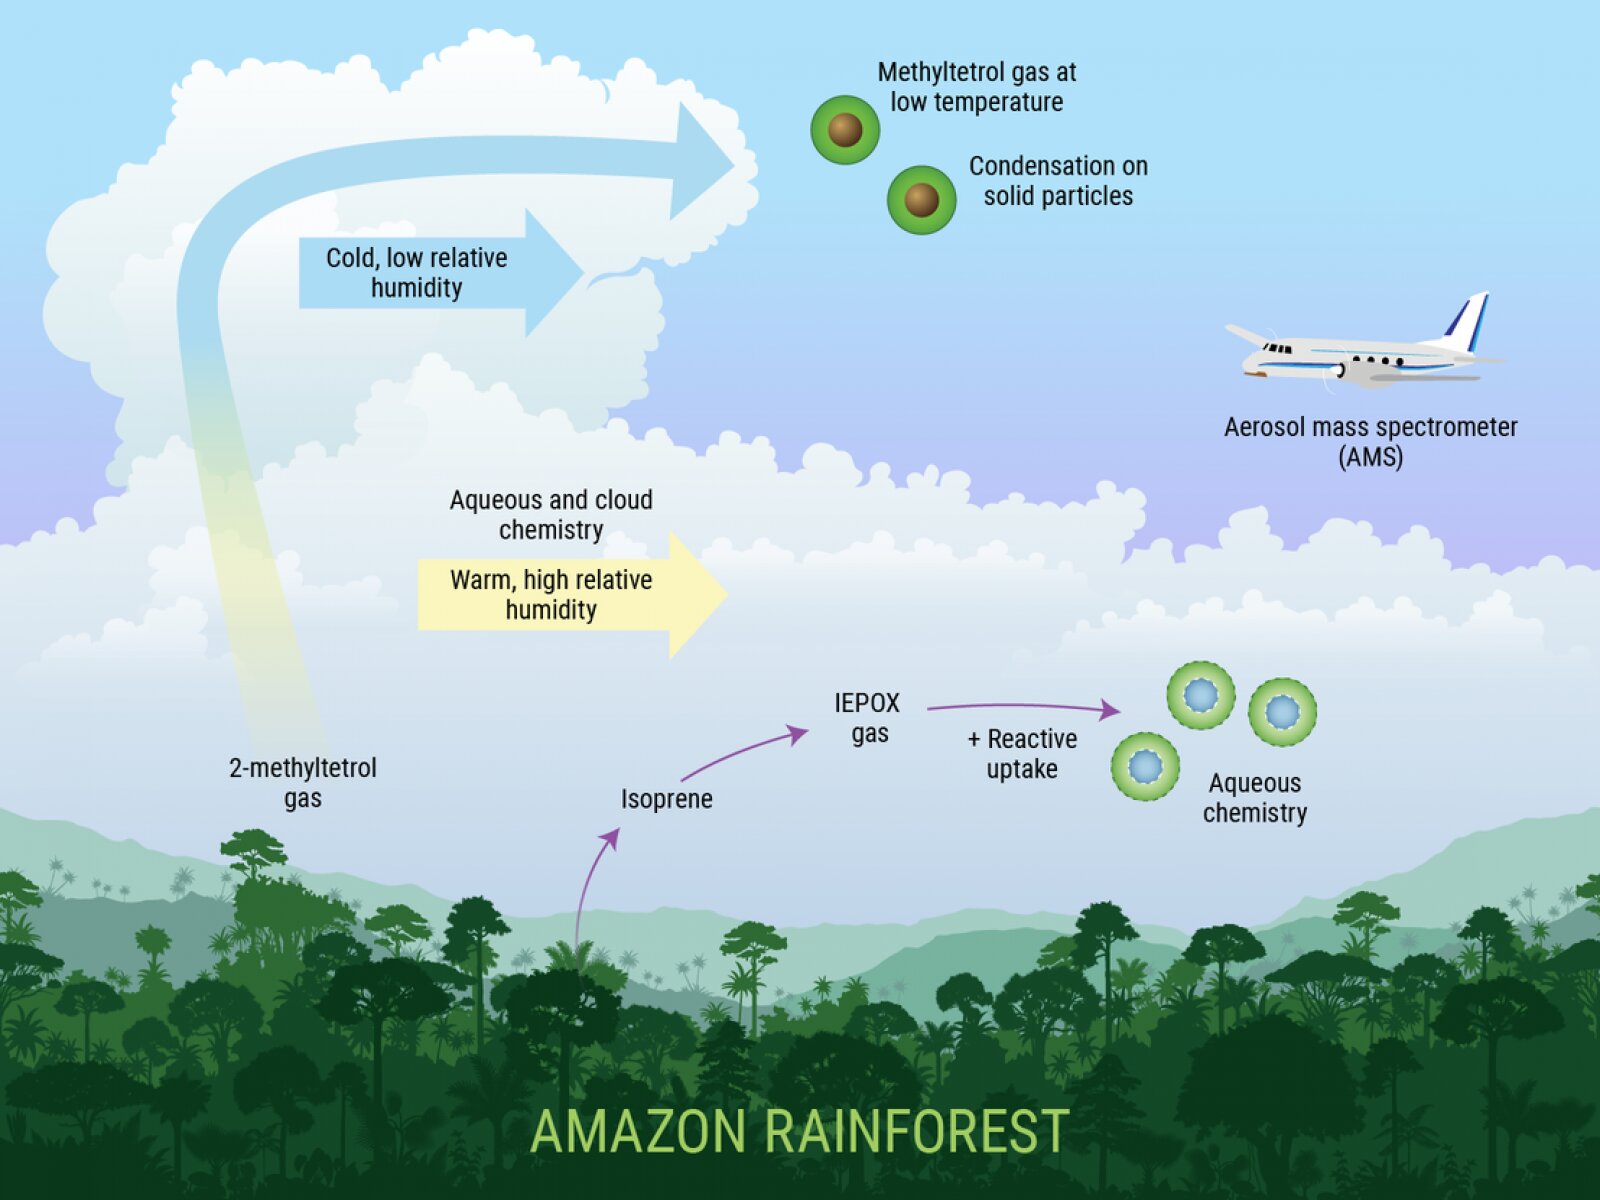 Amazon rainforest foliage gases affect the Earth's atmosphere